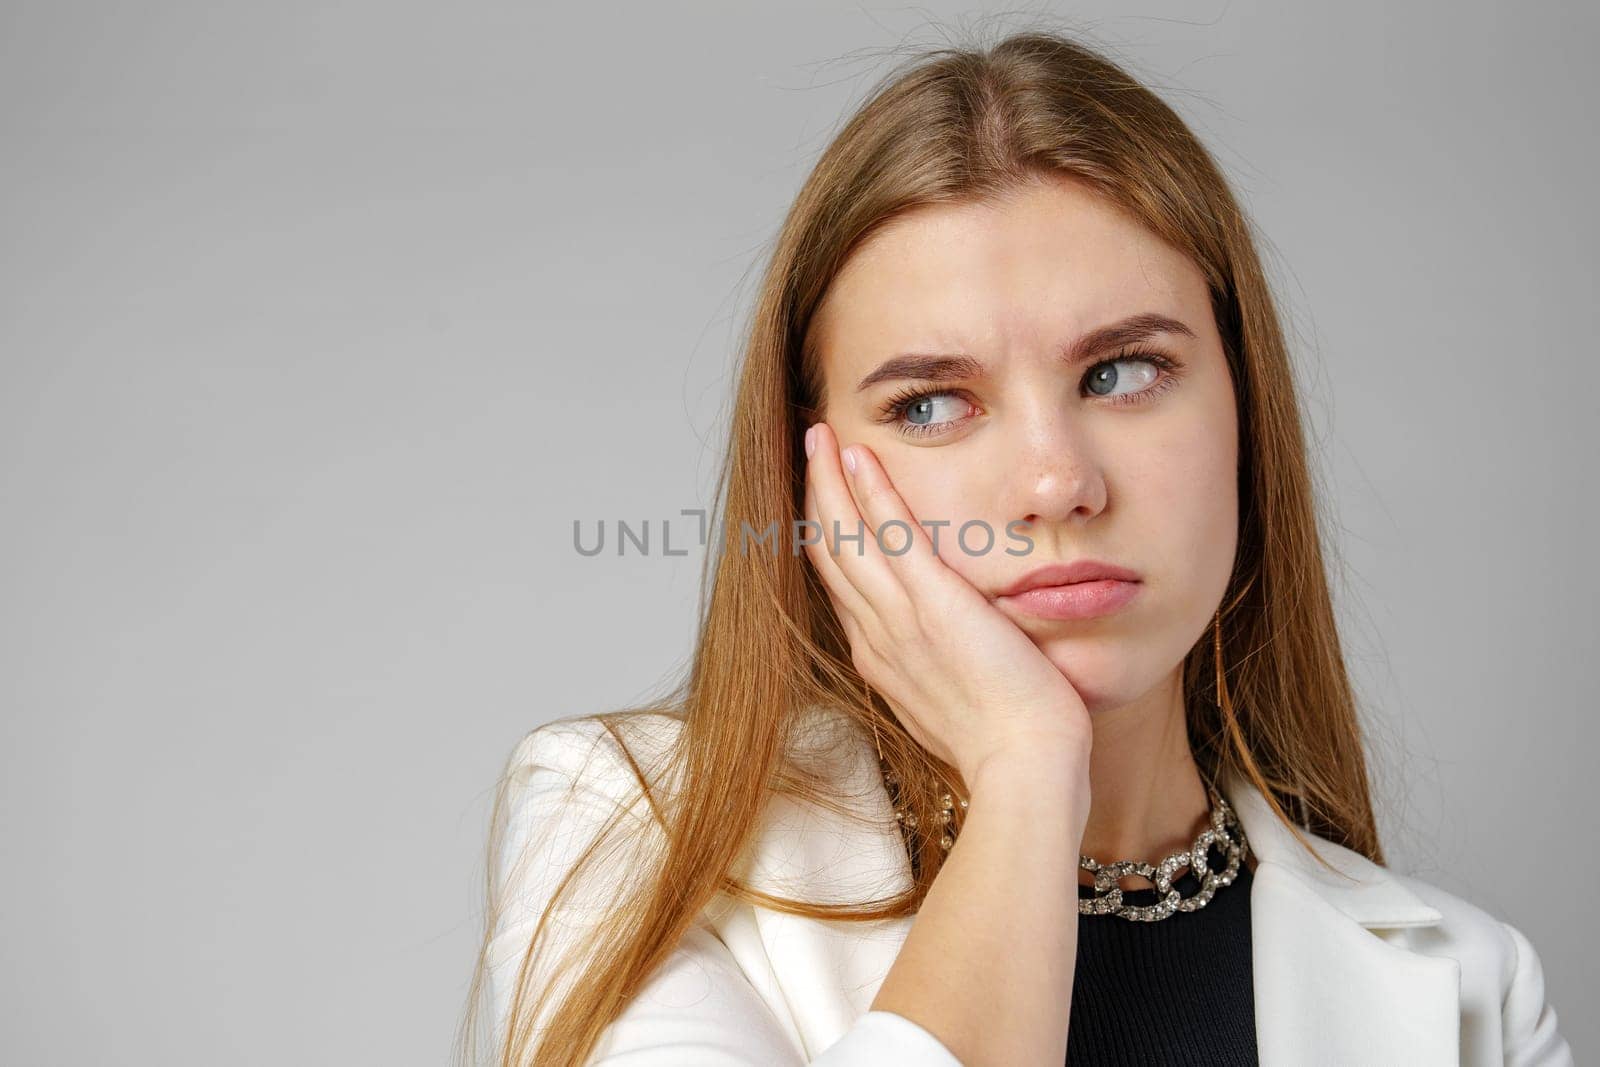 Young Woman Expressing Discontent against gray background in studio